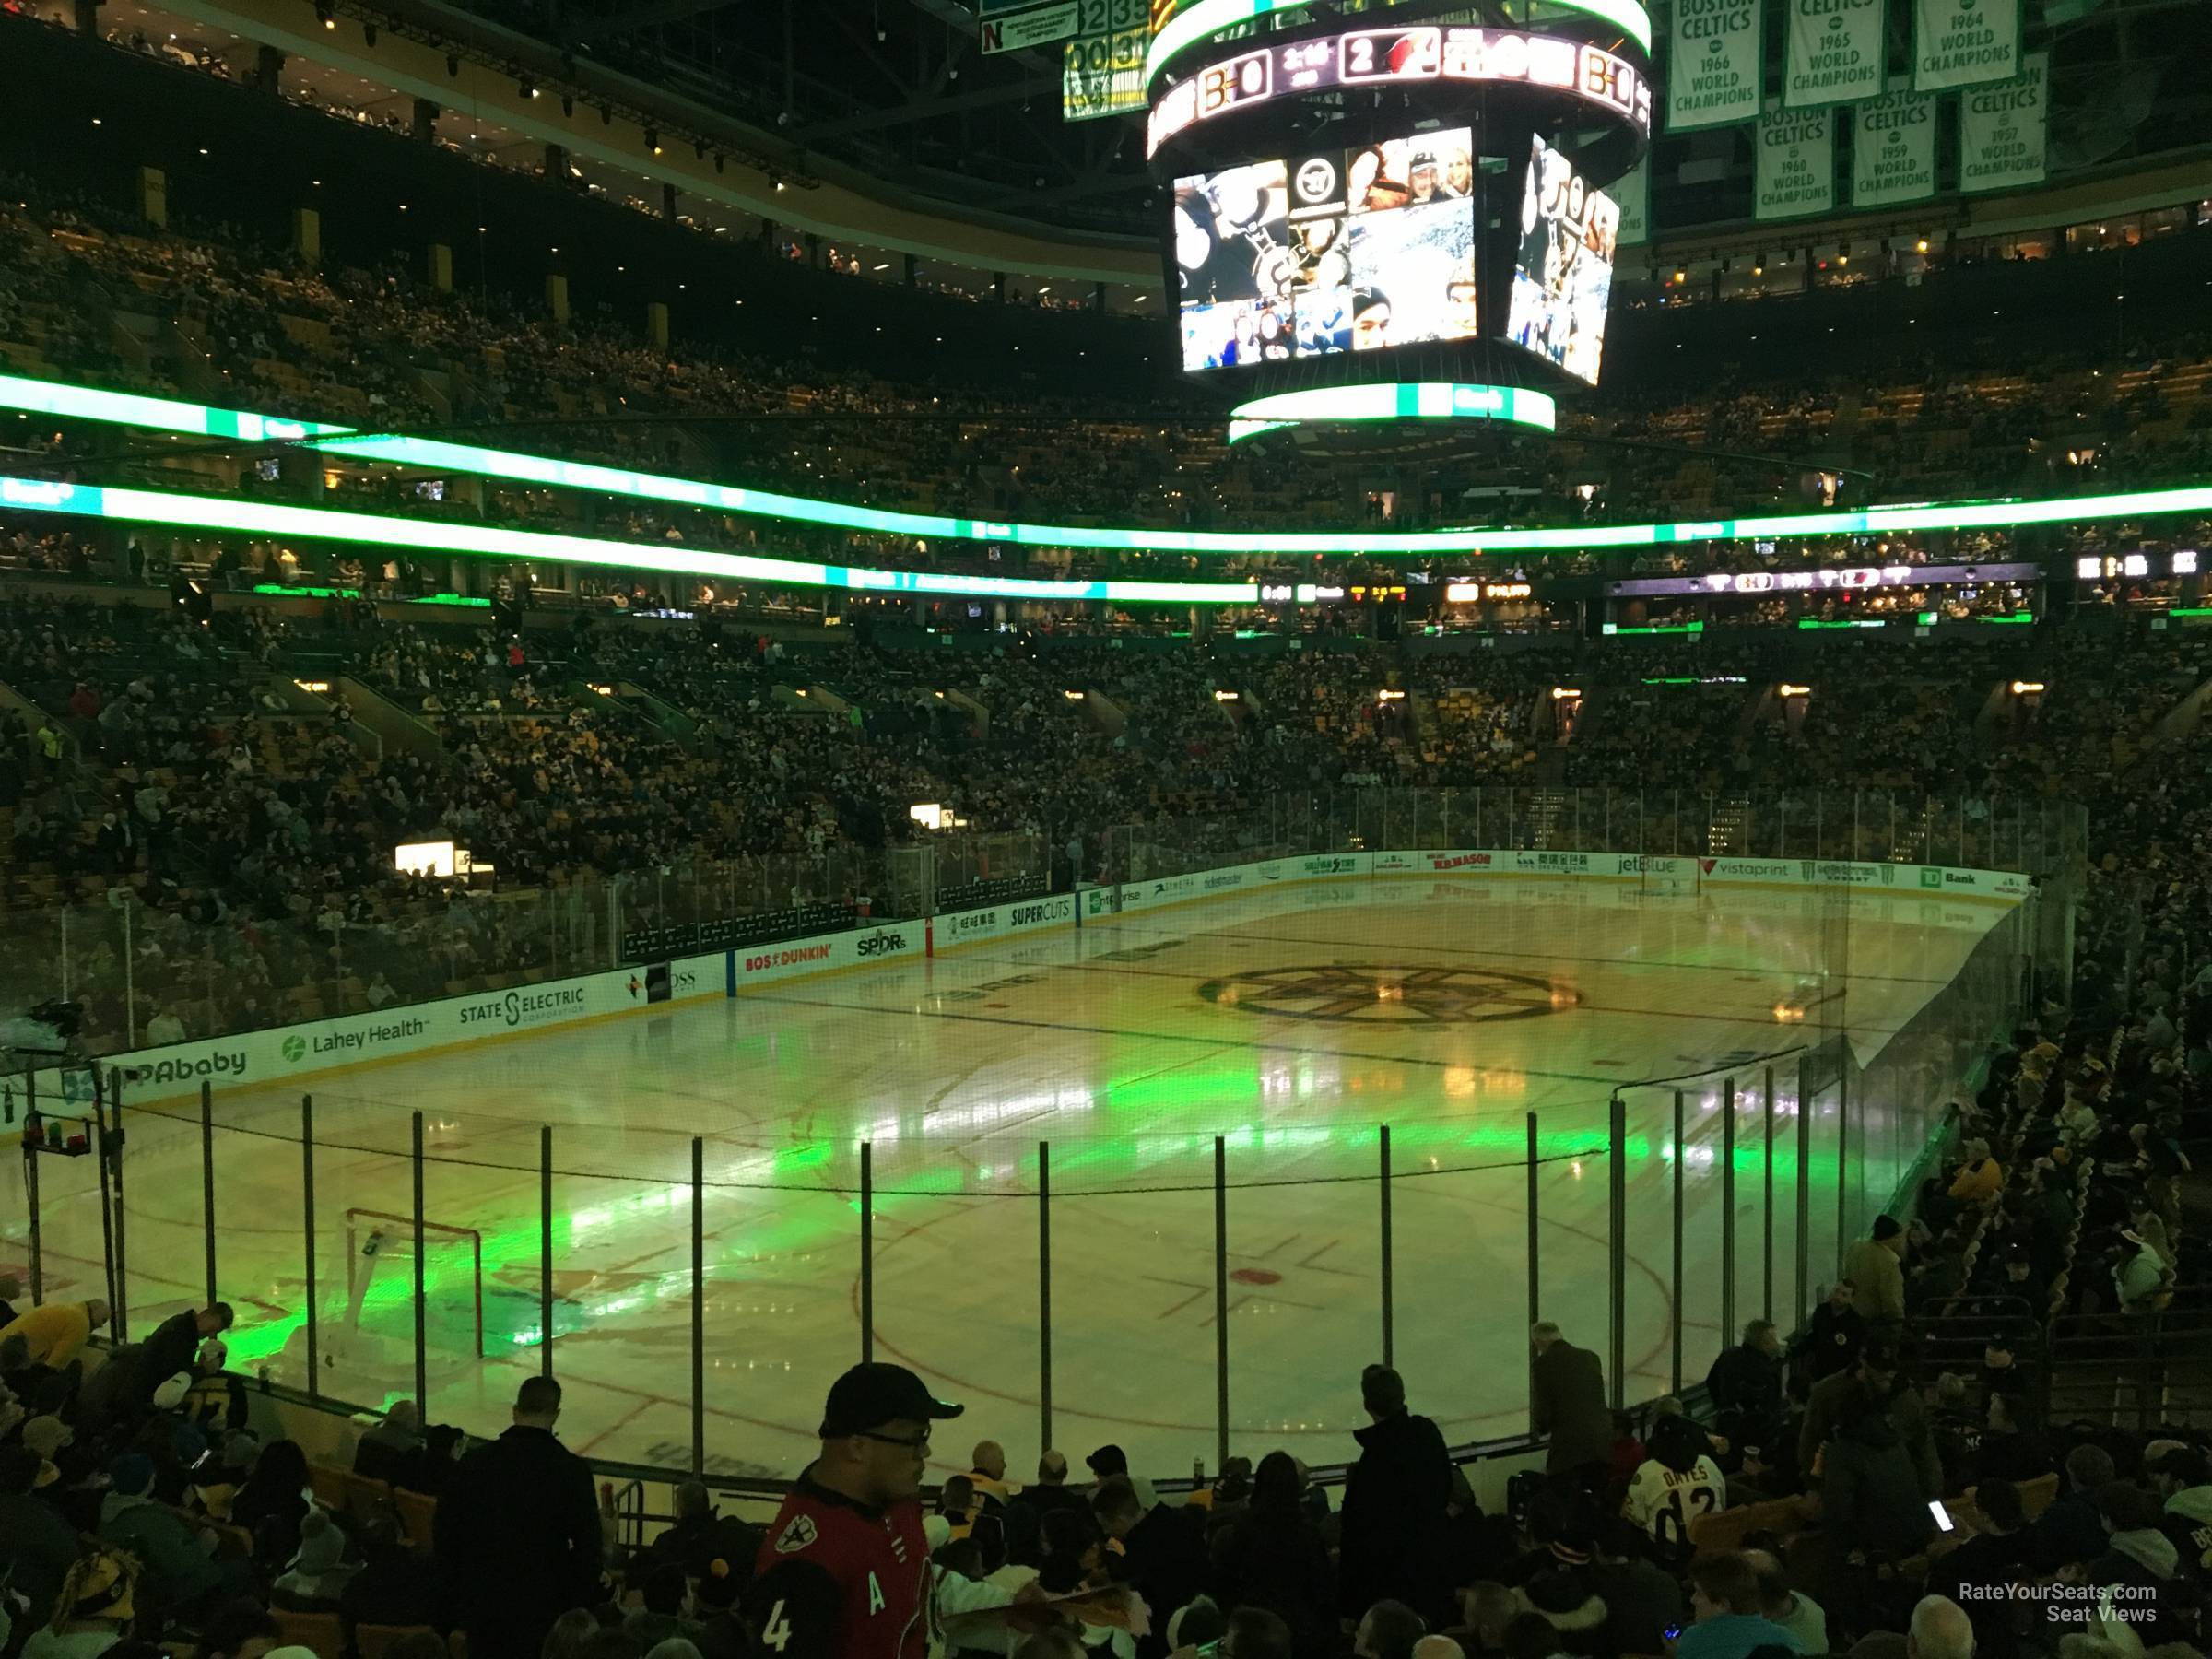 loge 16, row 15 seat view  for hockey - td garden